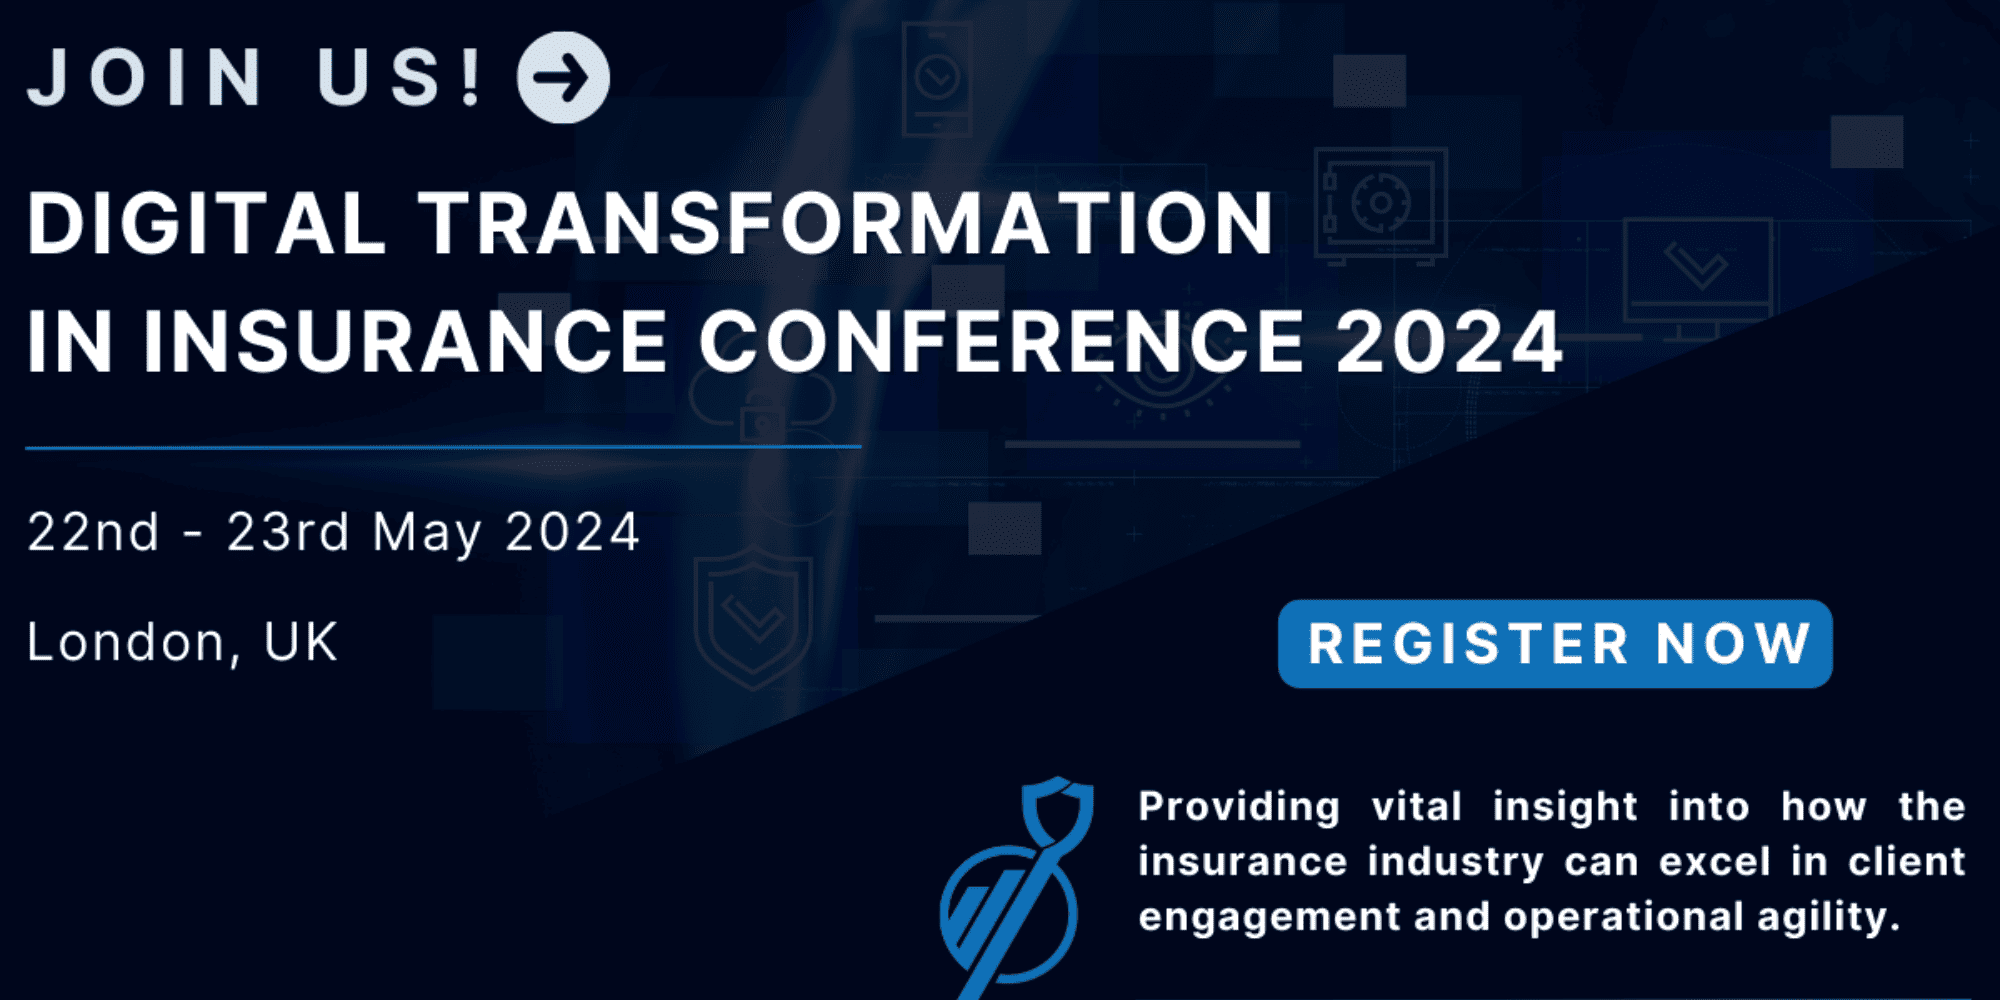 Join us at Digital Transformation in Insurance Conference 2024